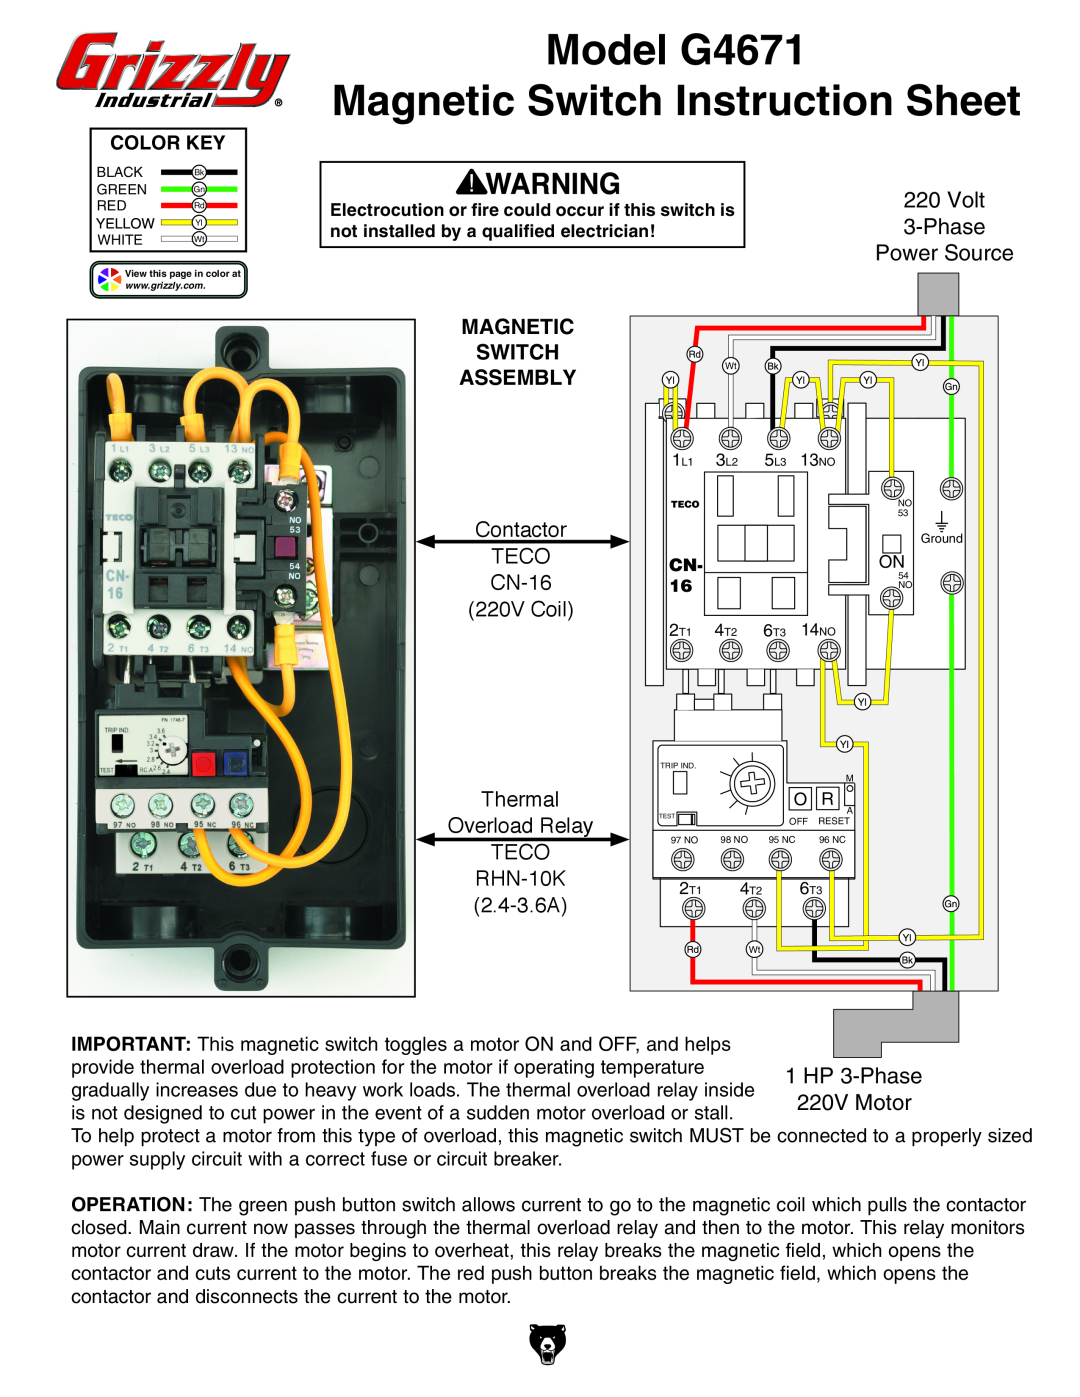 Grizzly instruction sheet Model G4671 Magnetic Switch Instruction Sheet, Magnetic Switch Assembly 